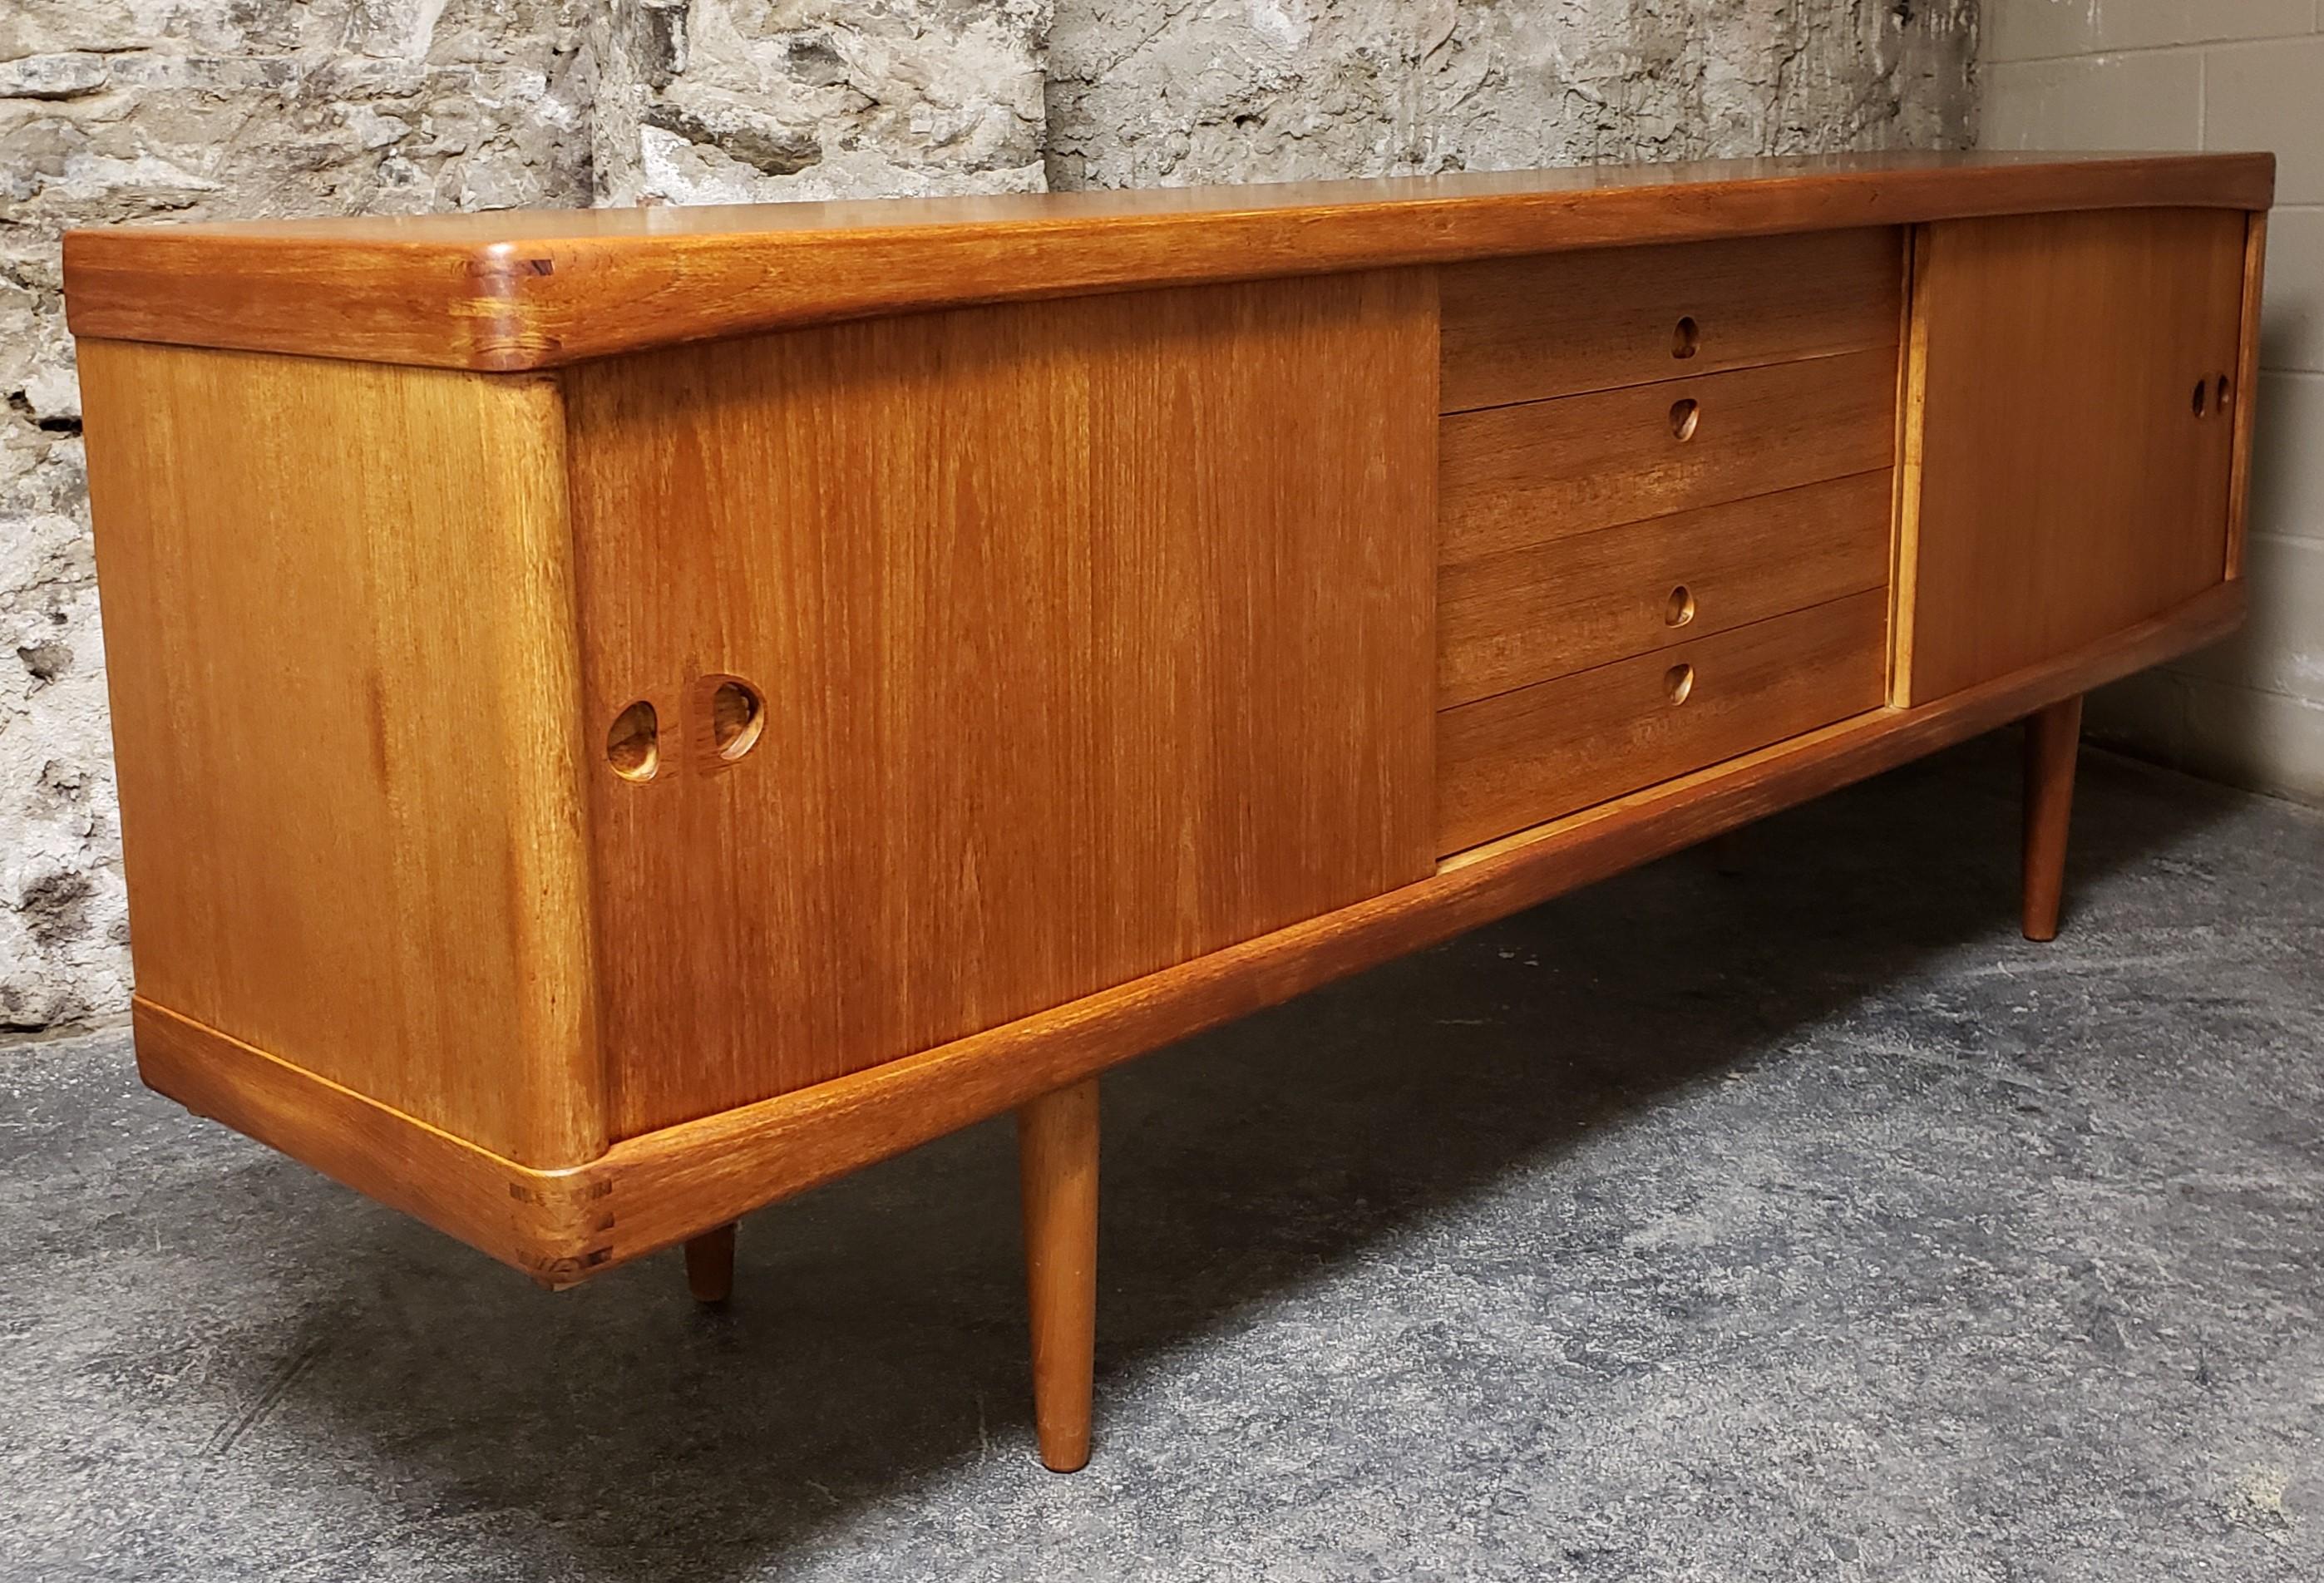 H.W. Klein teak sideboard / credenza for Bramin. It features beautifully contoured handles, corner inlay details and a finished back. It has 4 drawers with sliding doors on either side and round tapered legs. The interior shelving is adjustable.